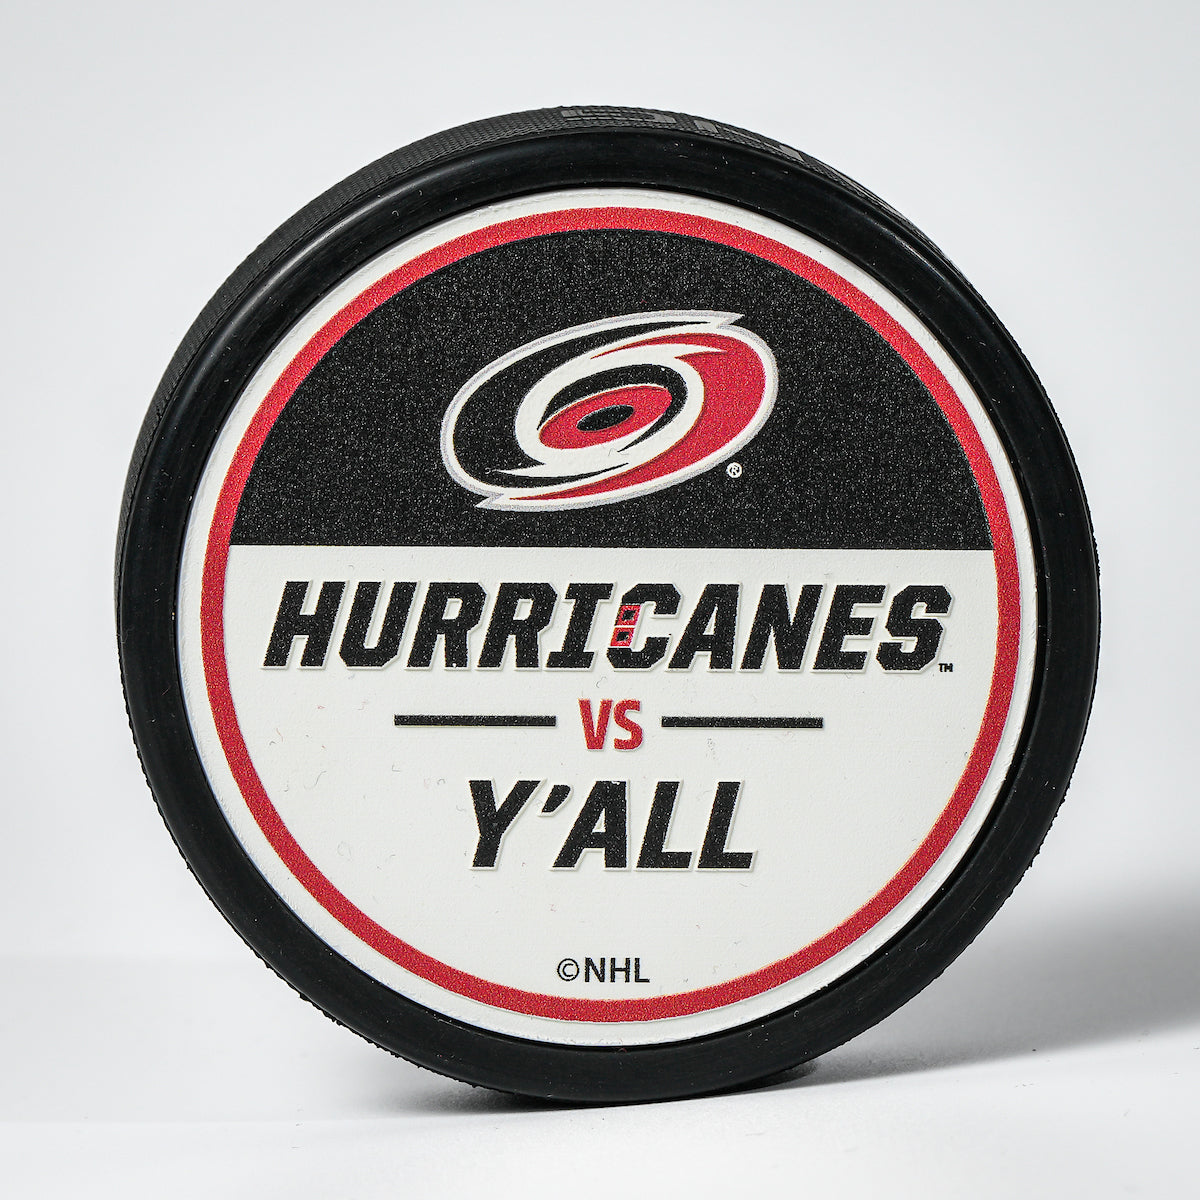 Hockey puck with the Hurricanes primary logo and the phrase "Hurricanes Vs. Y'all" on a black and white top face.